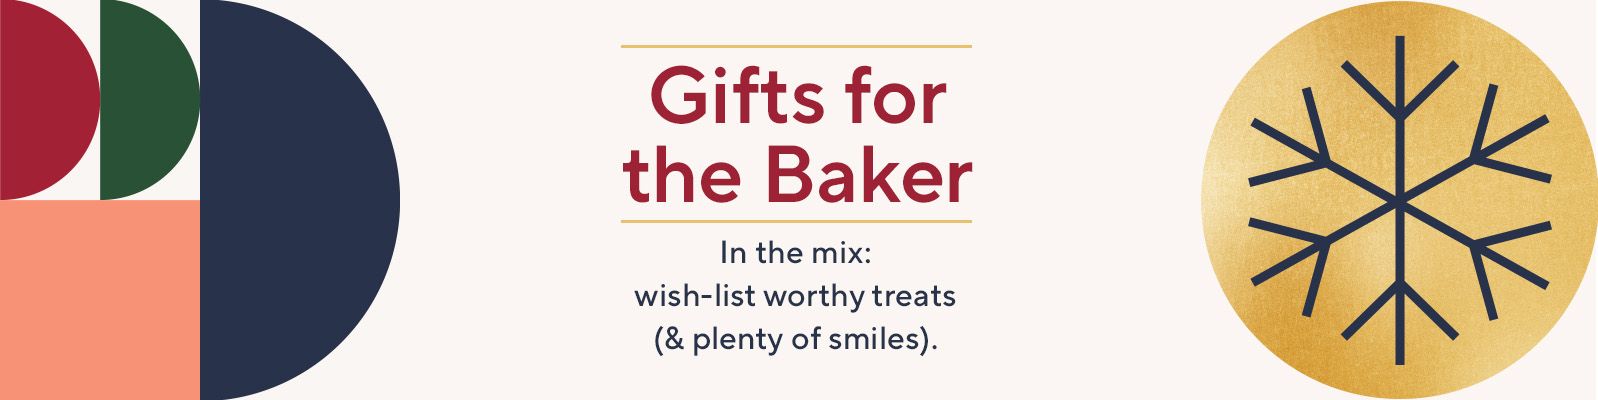 Gifts for the Baker  In the mix: wish-list worthy treats (& plenty of smiles). 